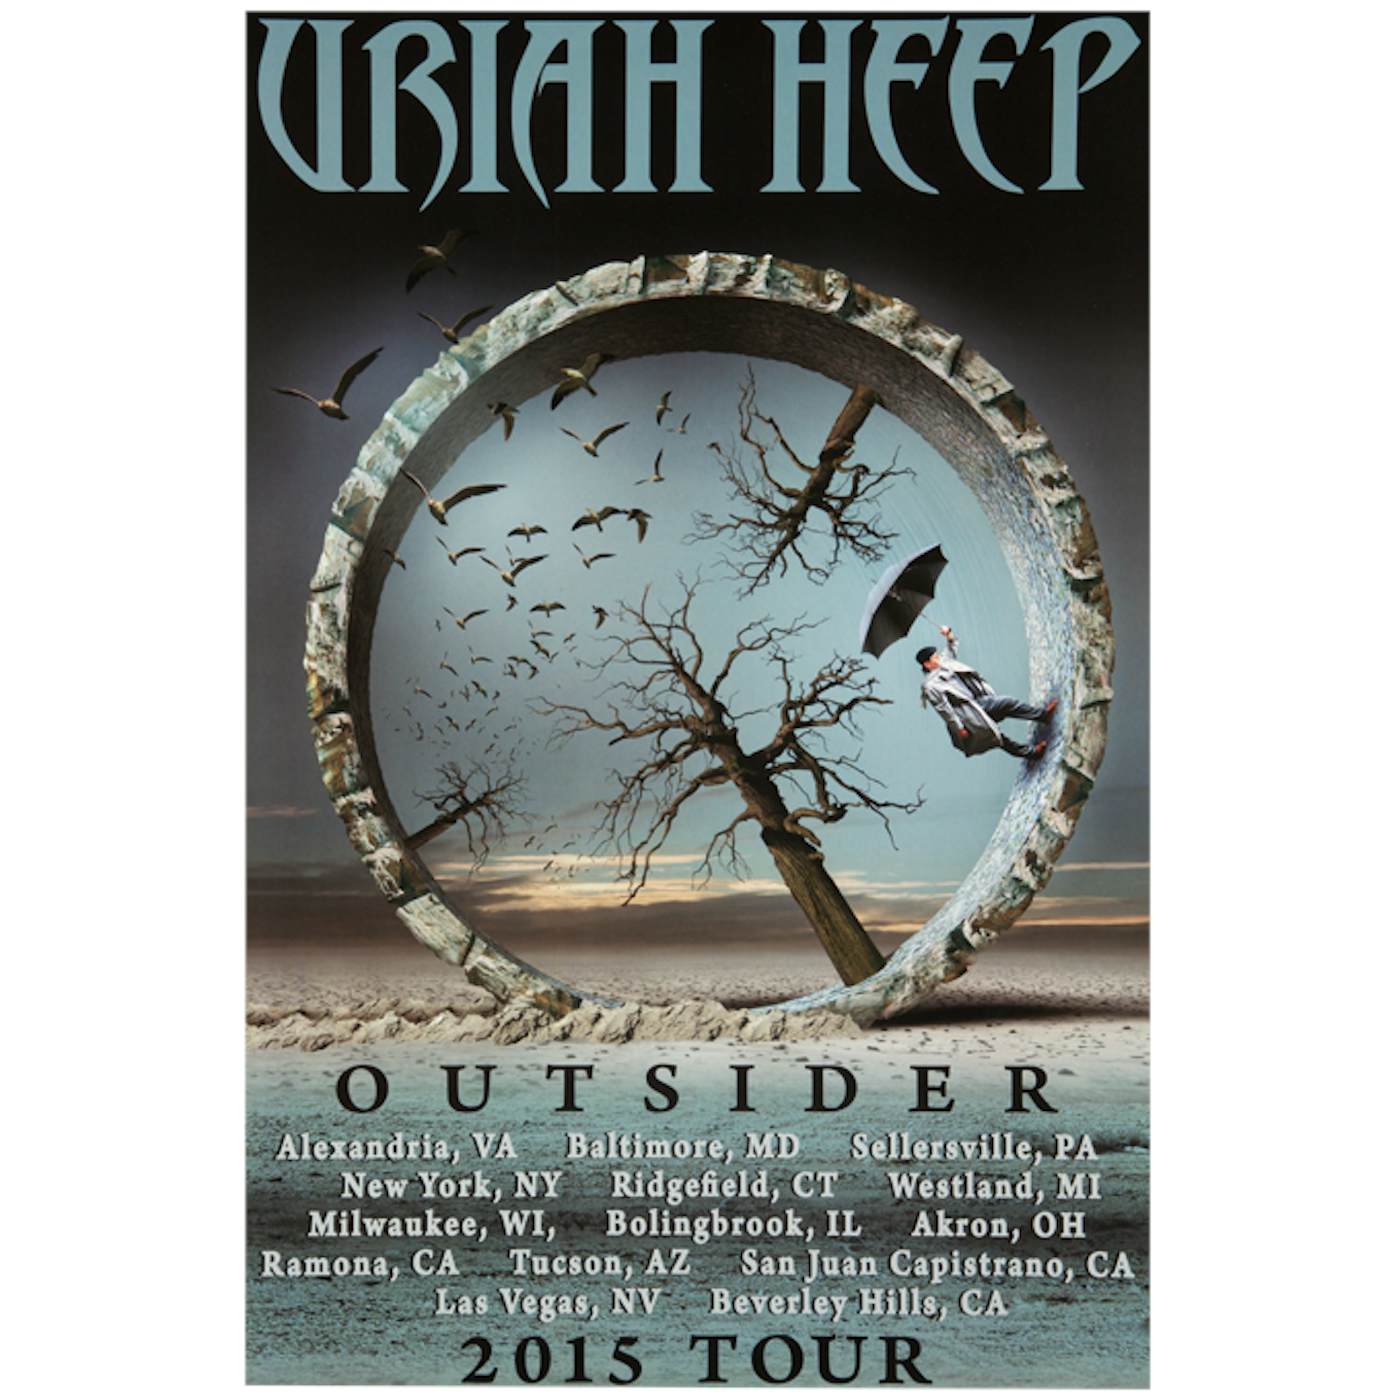 Uriah Heep "2015 Outsider" Tour Poster